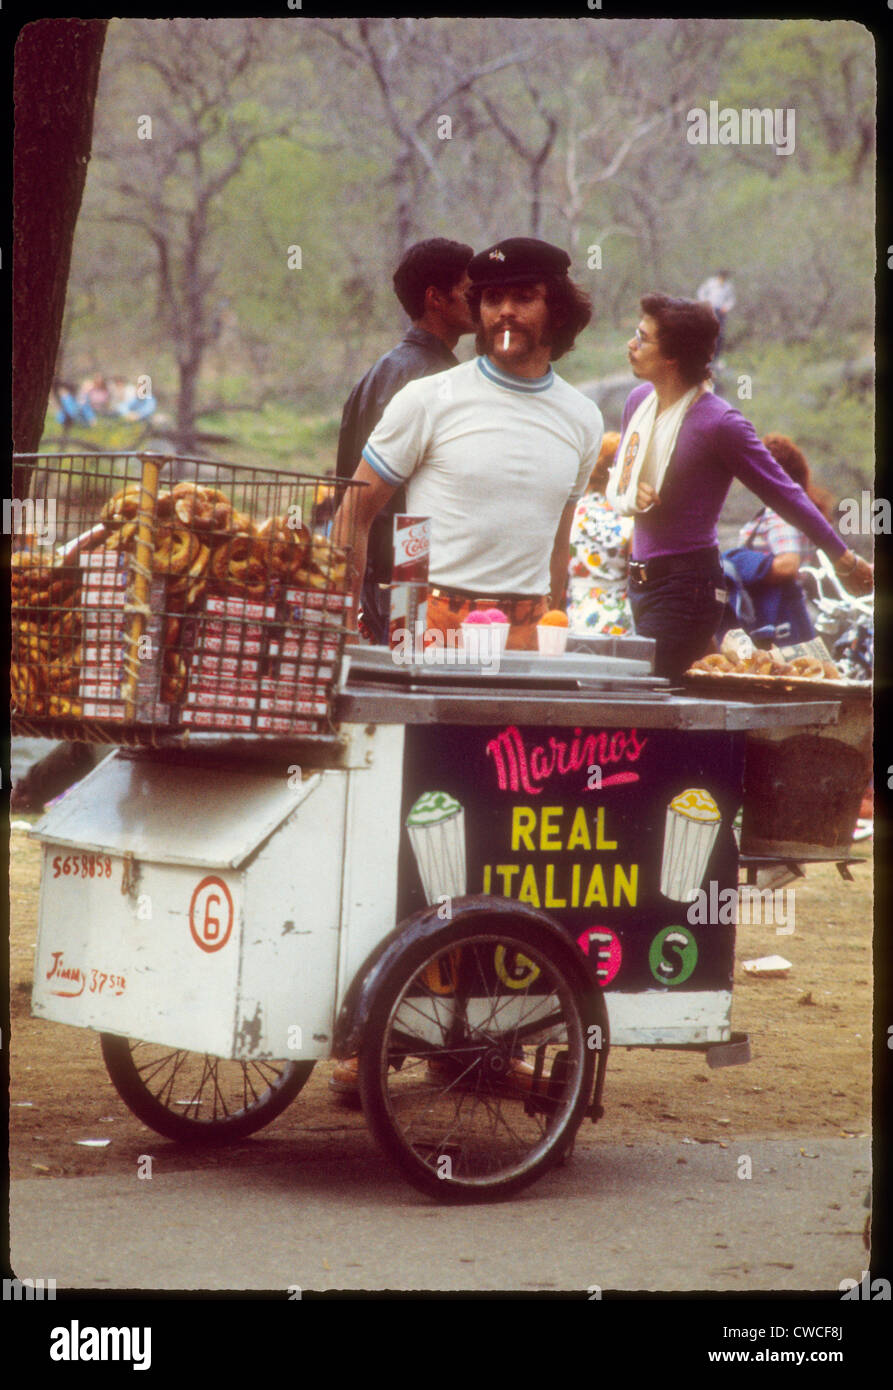 Vendor selling Marinos Real Italiain Ices in Central Park during late 1970s man day time centralpark Stock Photo